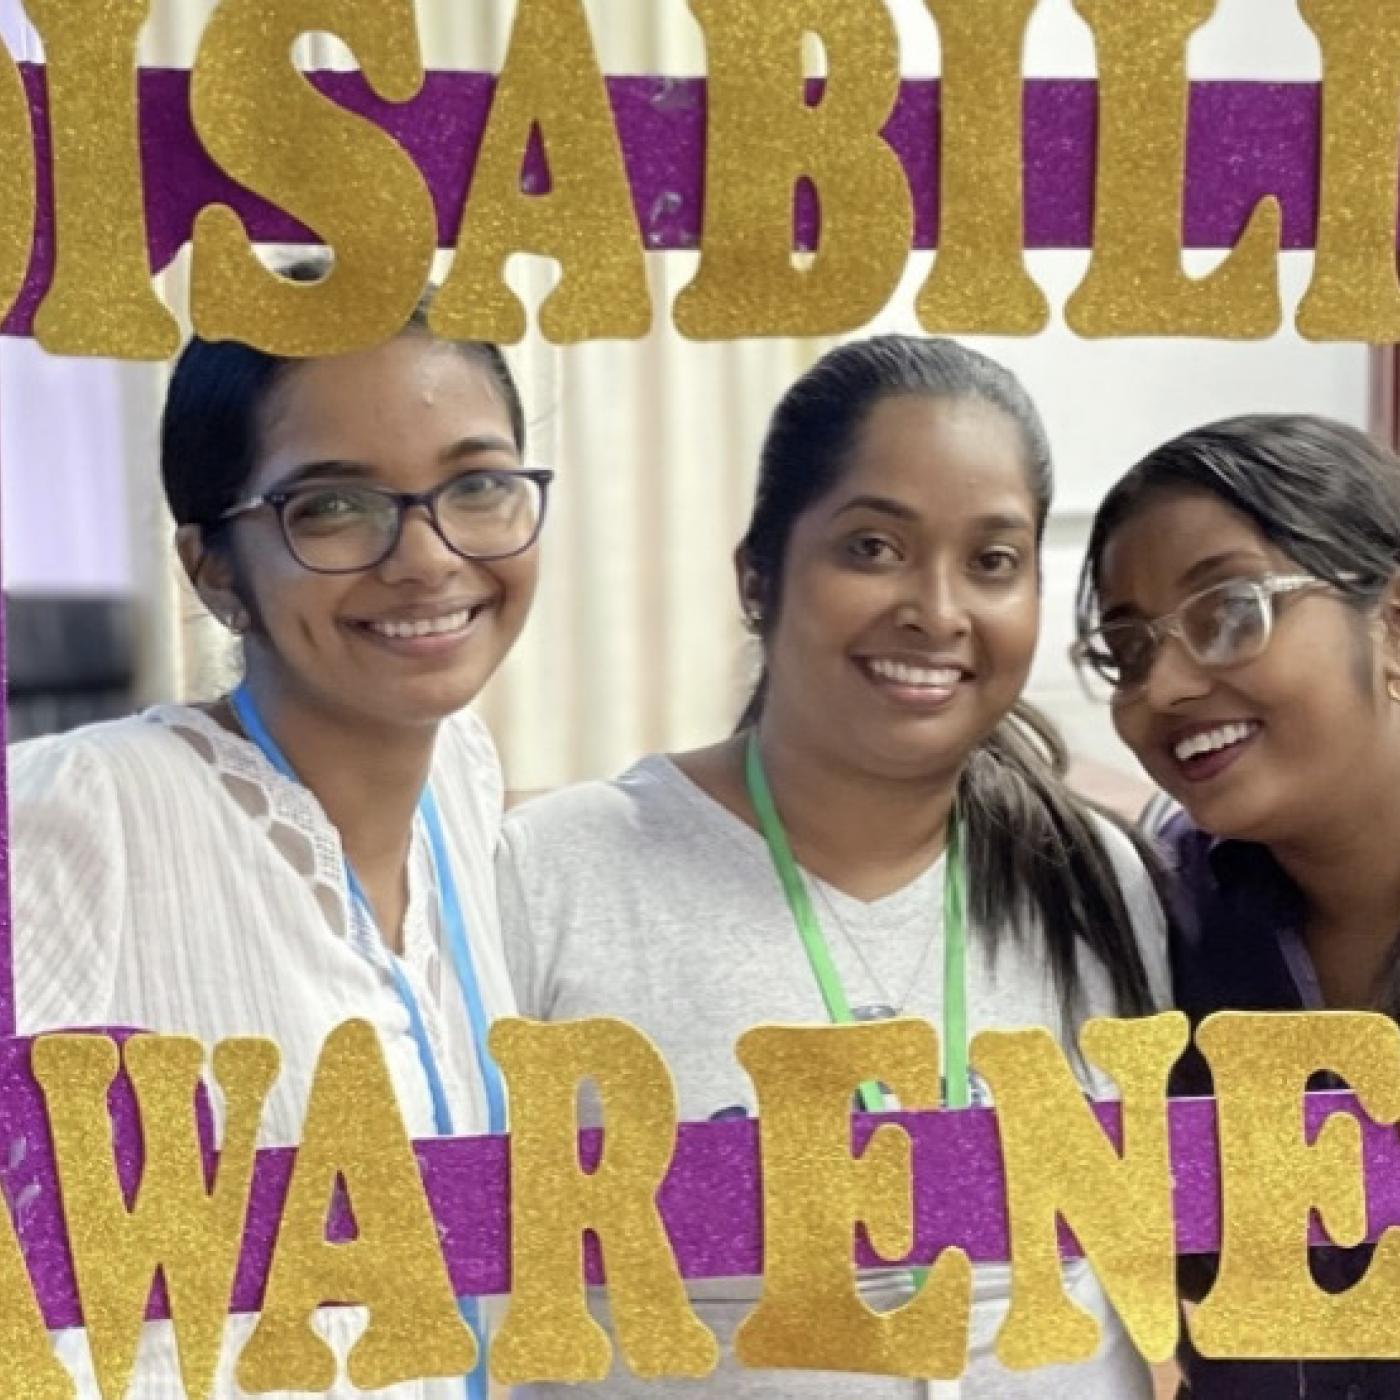 Alt text: Three women from Guyana smile at the camera. They are holding up a purple photo frame that reads “Disability Awareness” in gold letters.